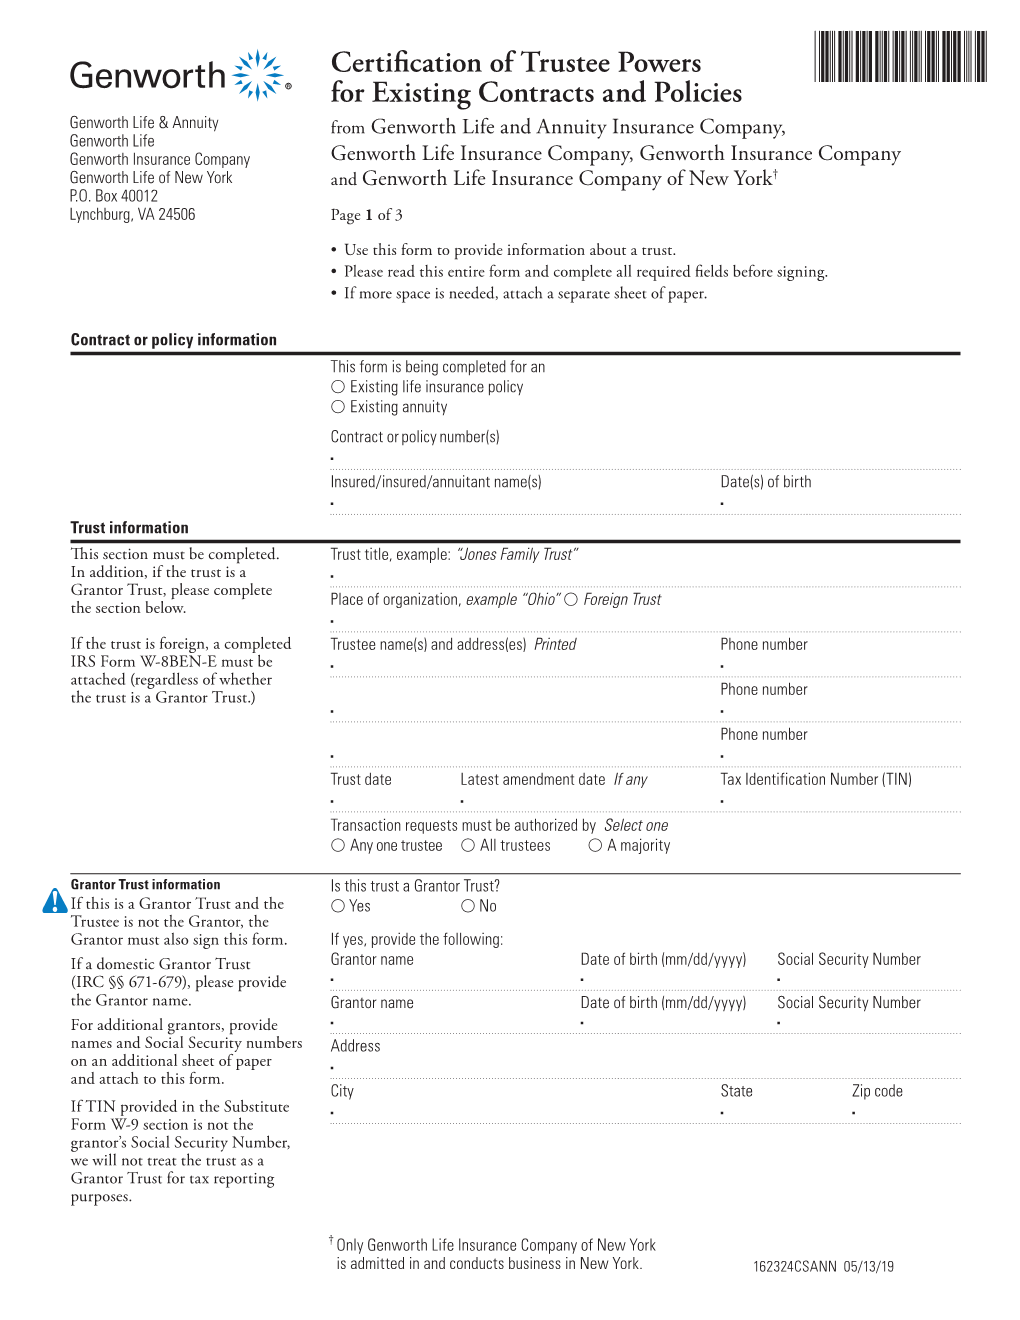 Certification of Trustee Powers for Existing Contracts and Policies Page 2 of 3